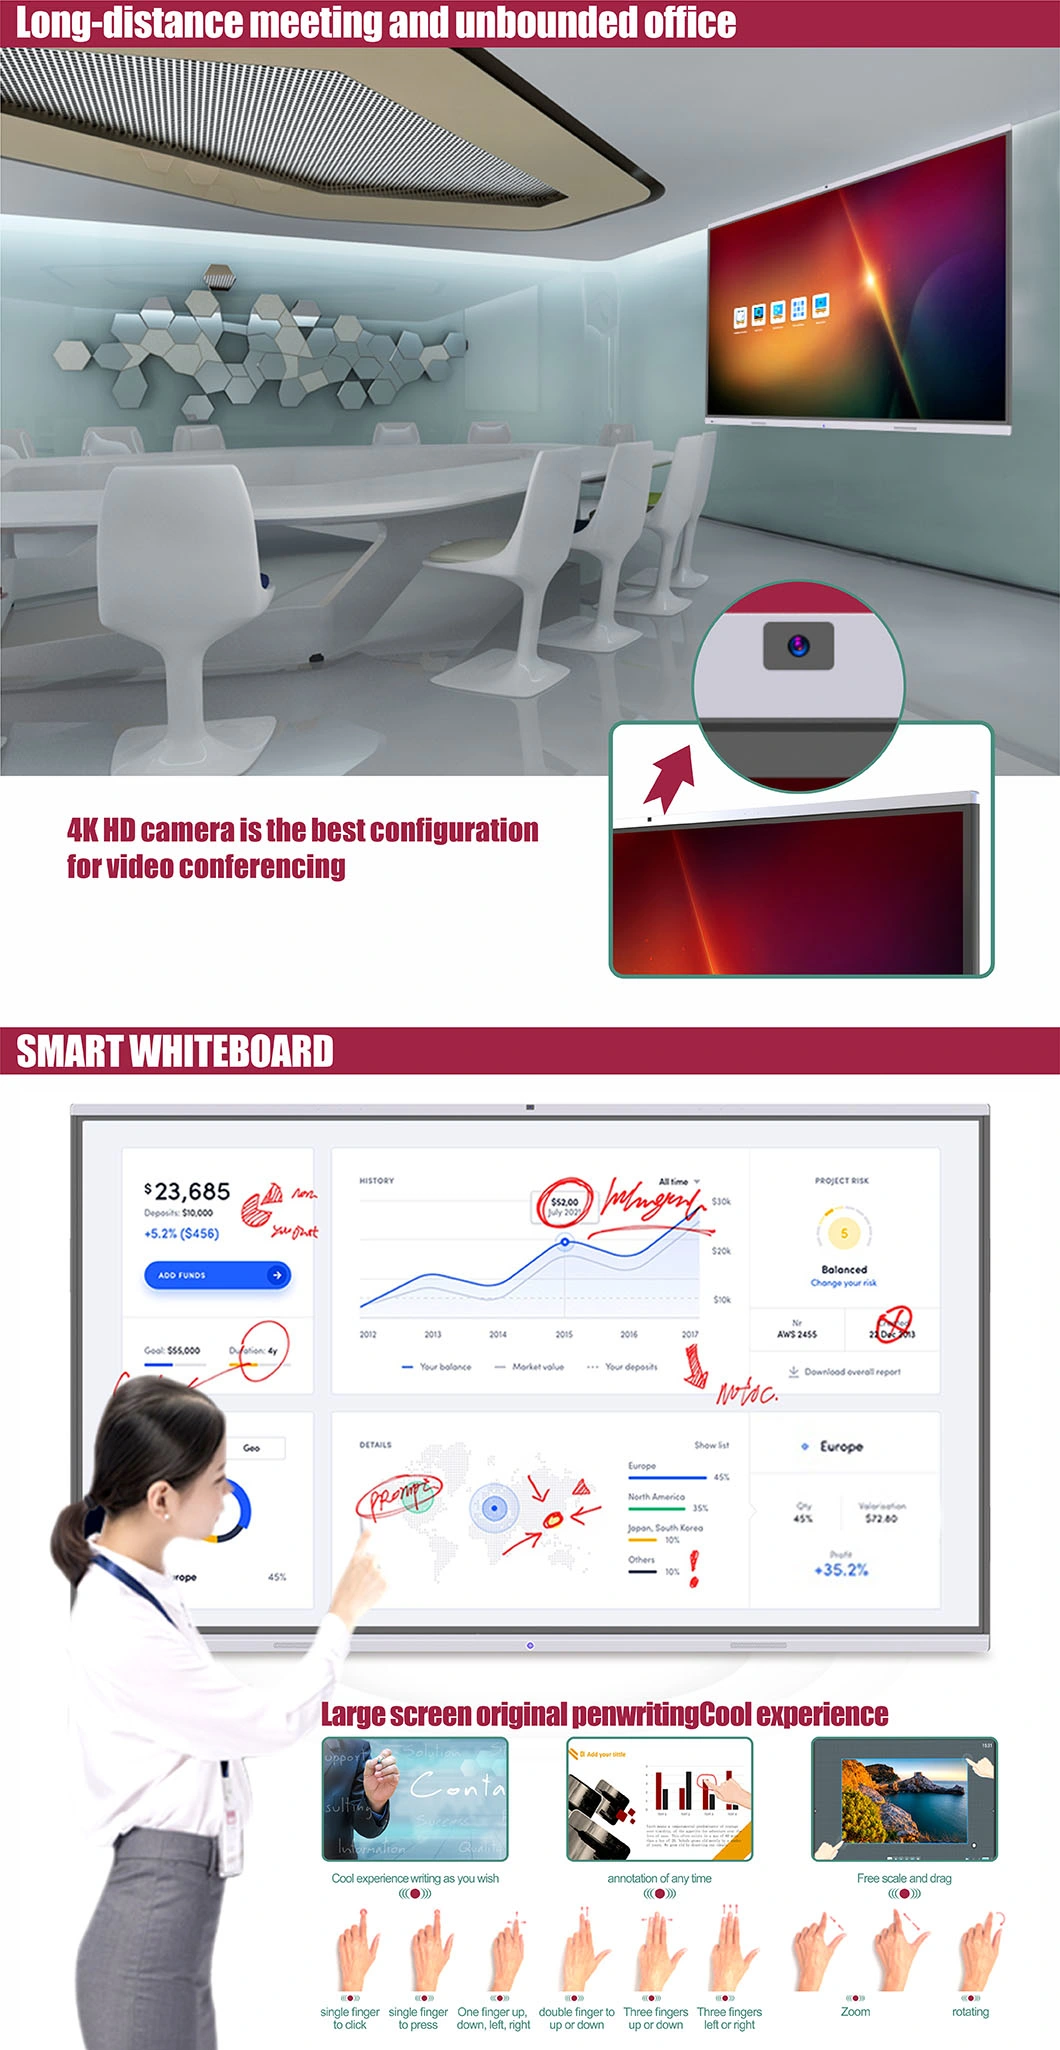 T6 Series 75 Inch Touch Display Digital Meeting Panel Whiteboard Smart Board Interactive Display Education Training